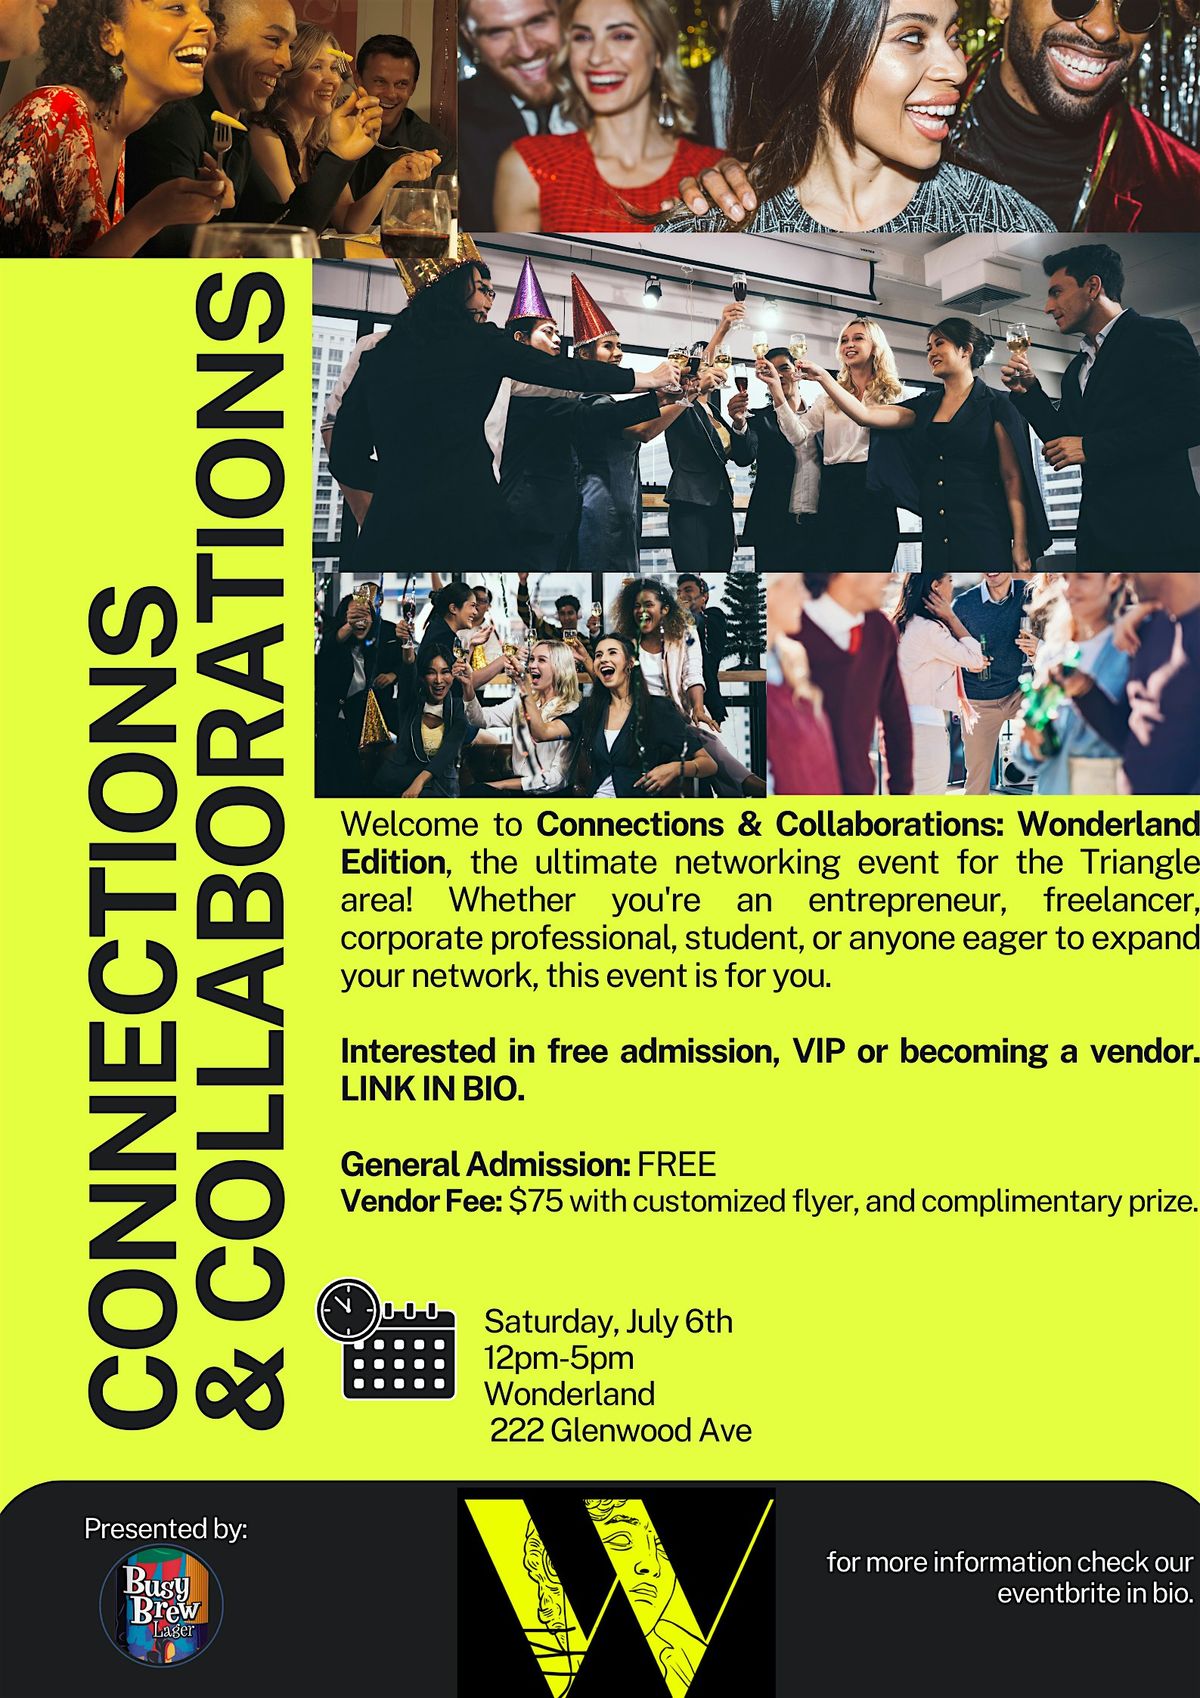 Connections & Collaborations: Wonderland edition